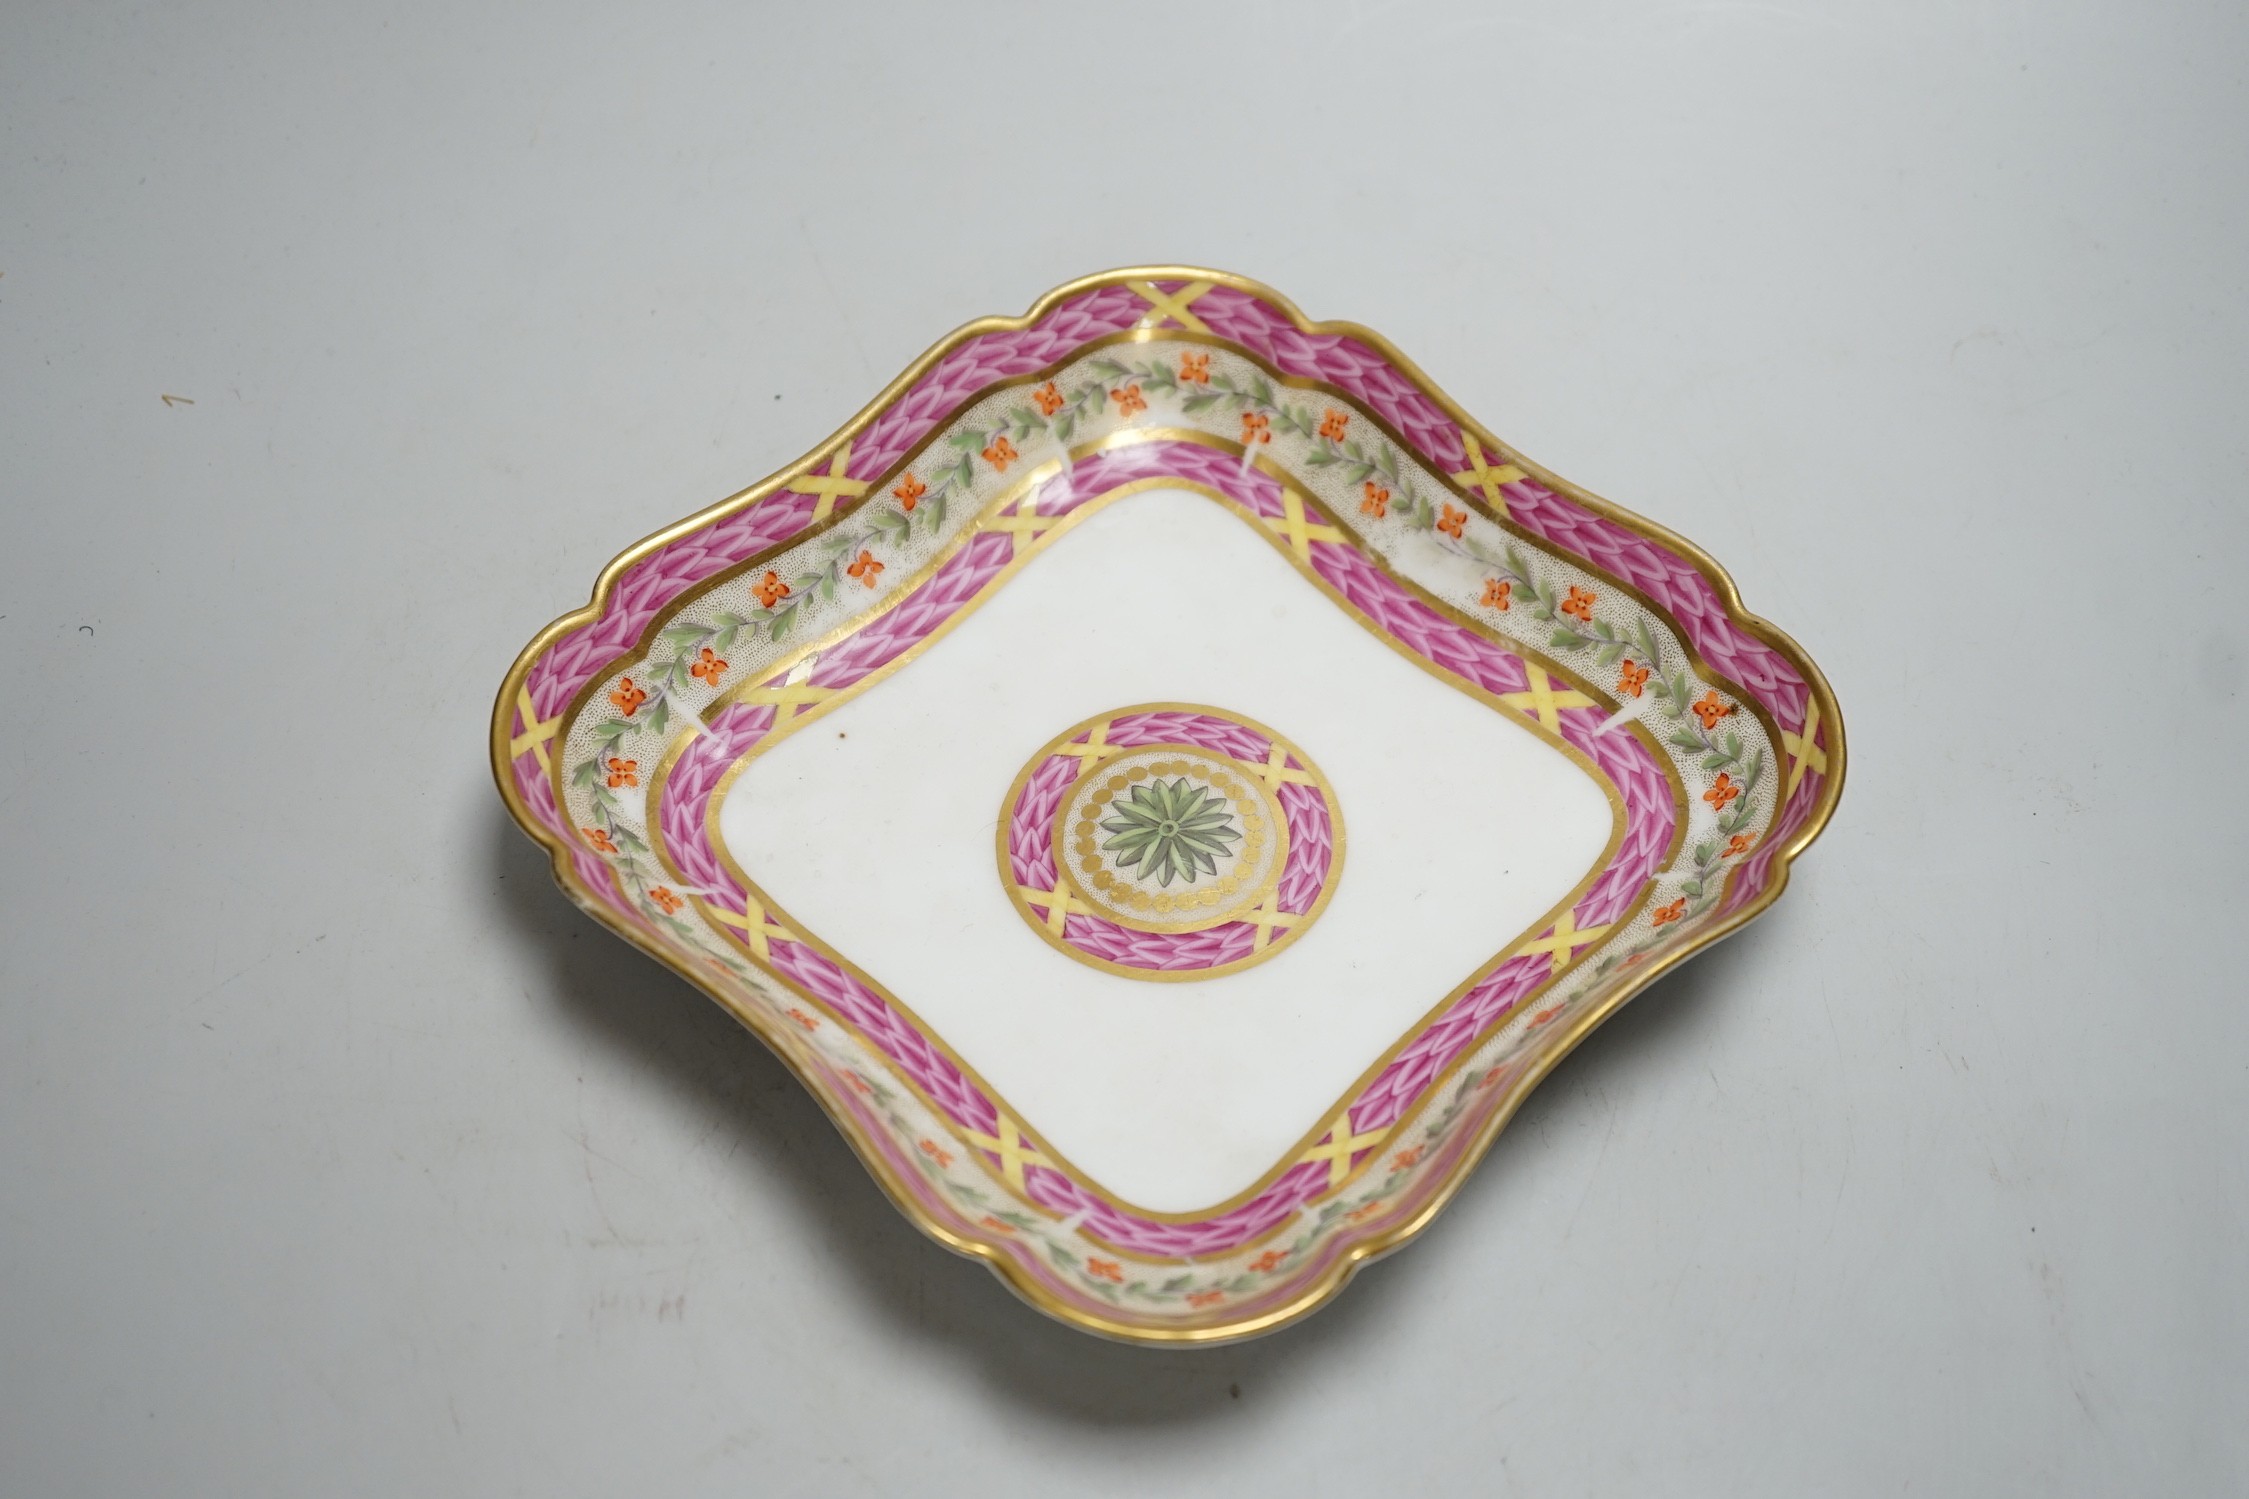 An 18th century Rue Thiroux square shaped dish painted with two bands of pink leaves, and a band of flowers above a central roundel, stencilled crown A mark in orange, the factory was also known as Porcelaines a la Reine